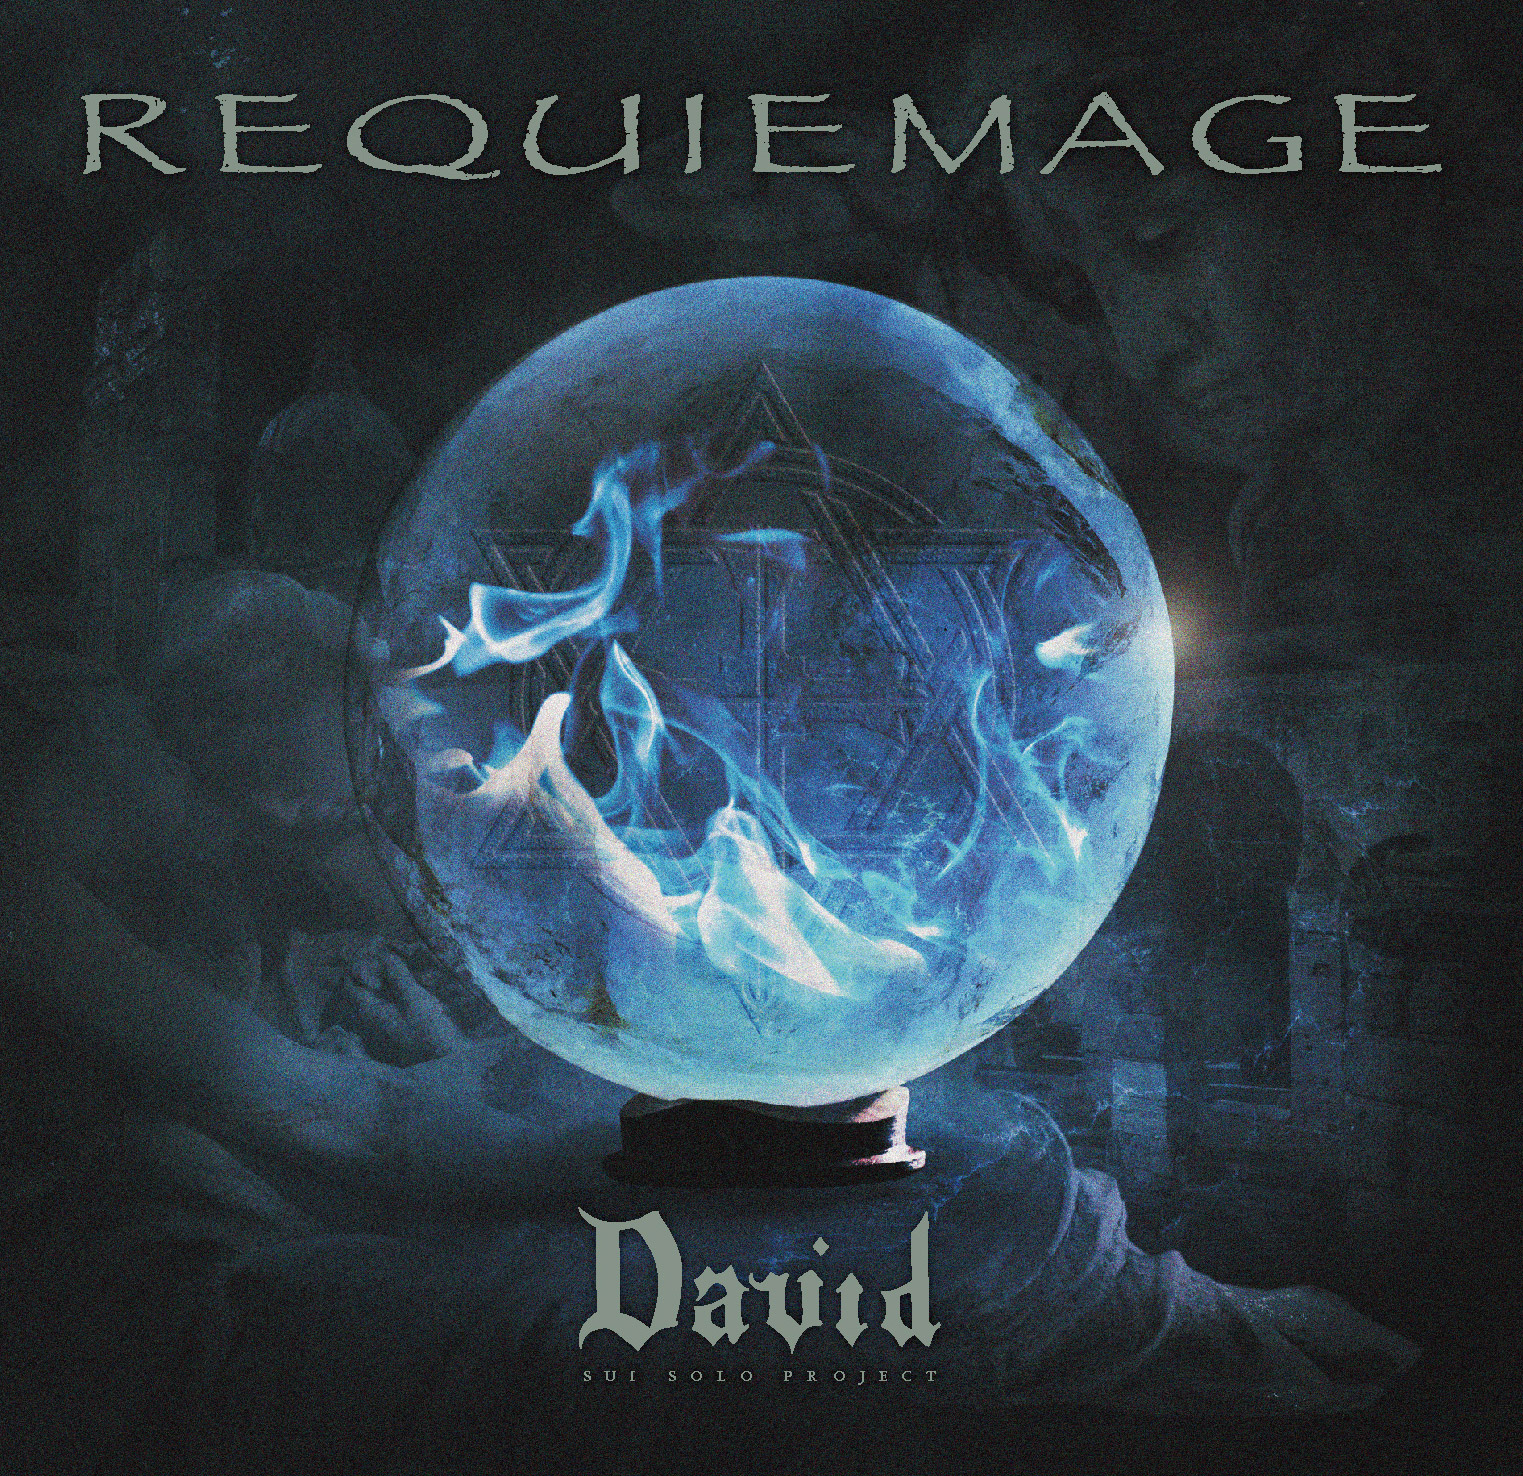 1st Maxi Single「Requiemage」 - David Official Site